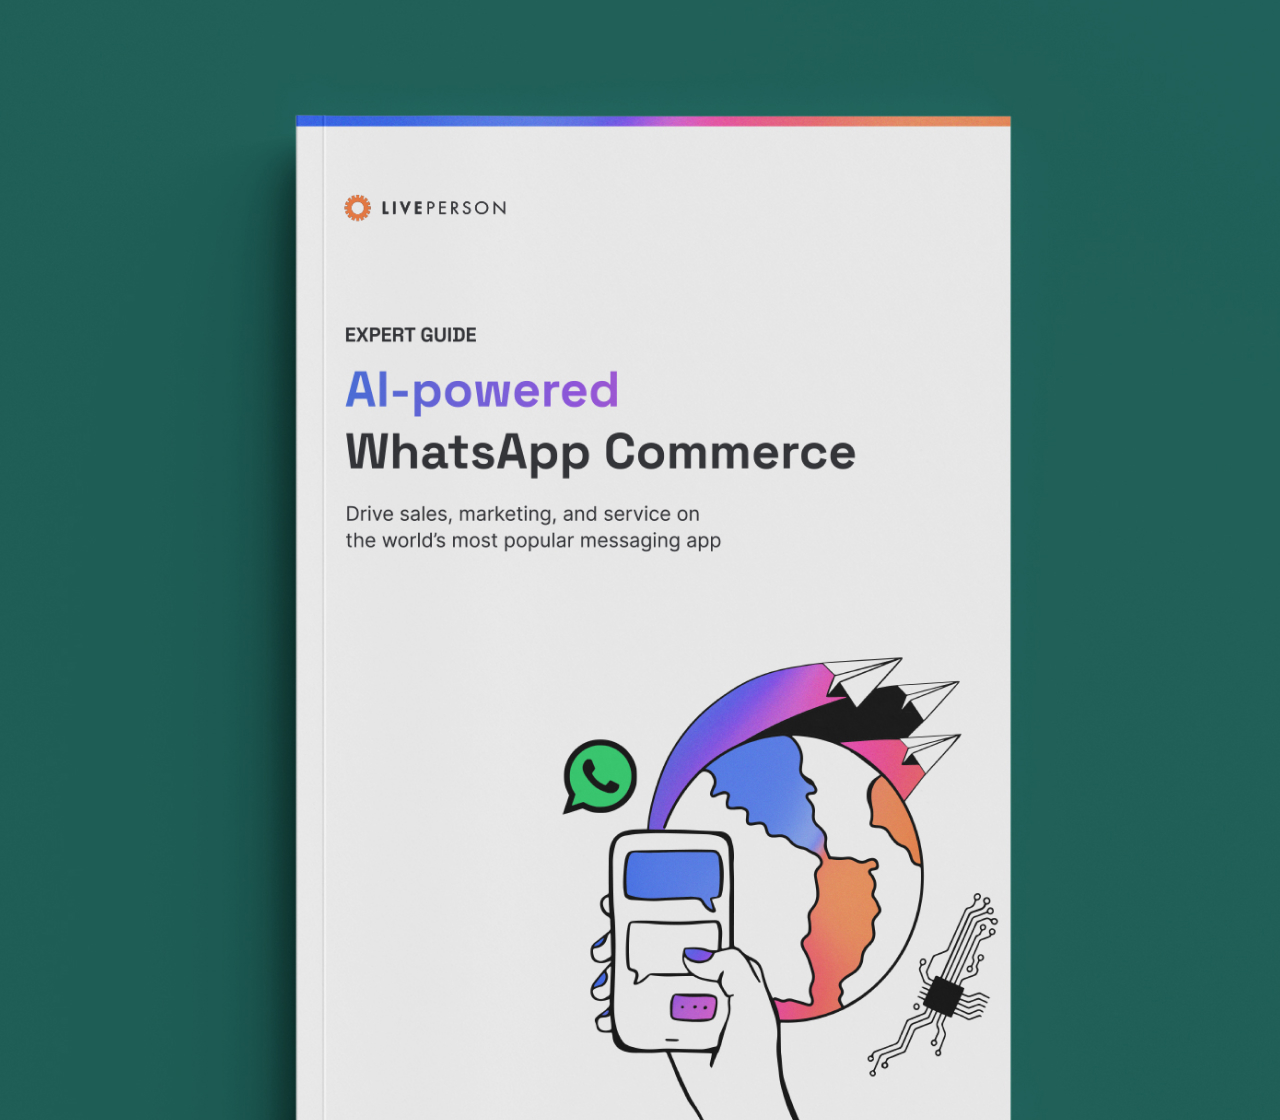 Cover of expert guide to WhatsApp chatbot and messaging strategies